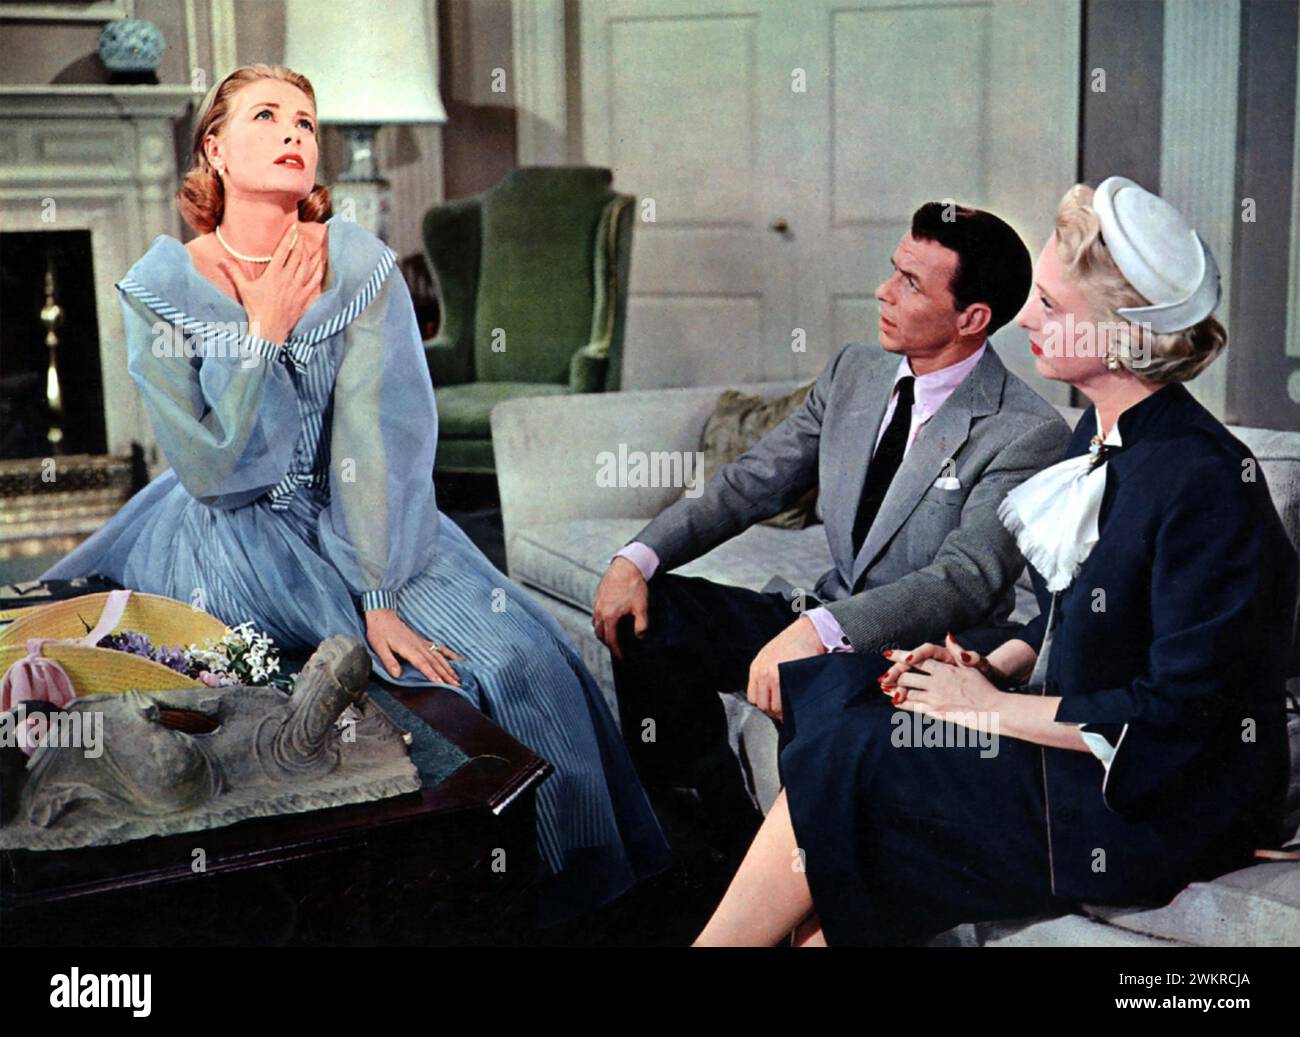 HIGH SOCIETY 1956 MGM film with from left : Grace Kelly as Tracy Lord, Frank Sinatra as Mike Connor and Celeste Holm as  Liz Imbrie Stock Photo